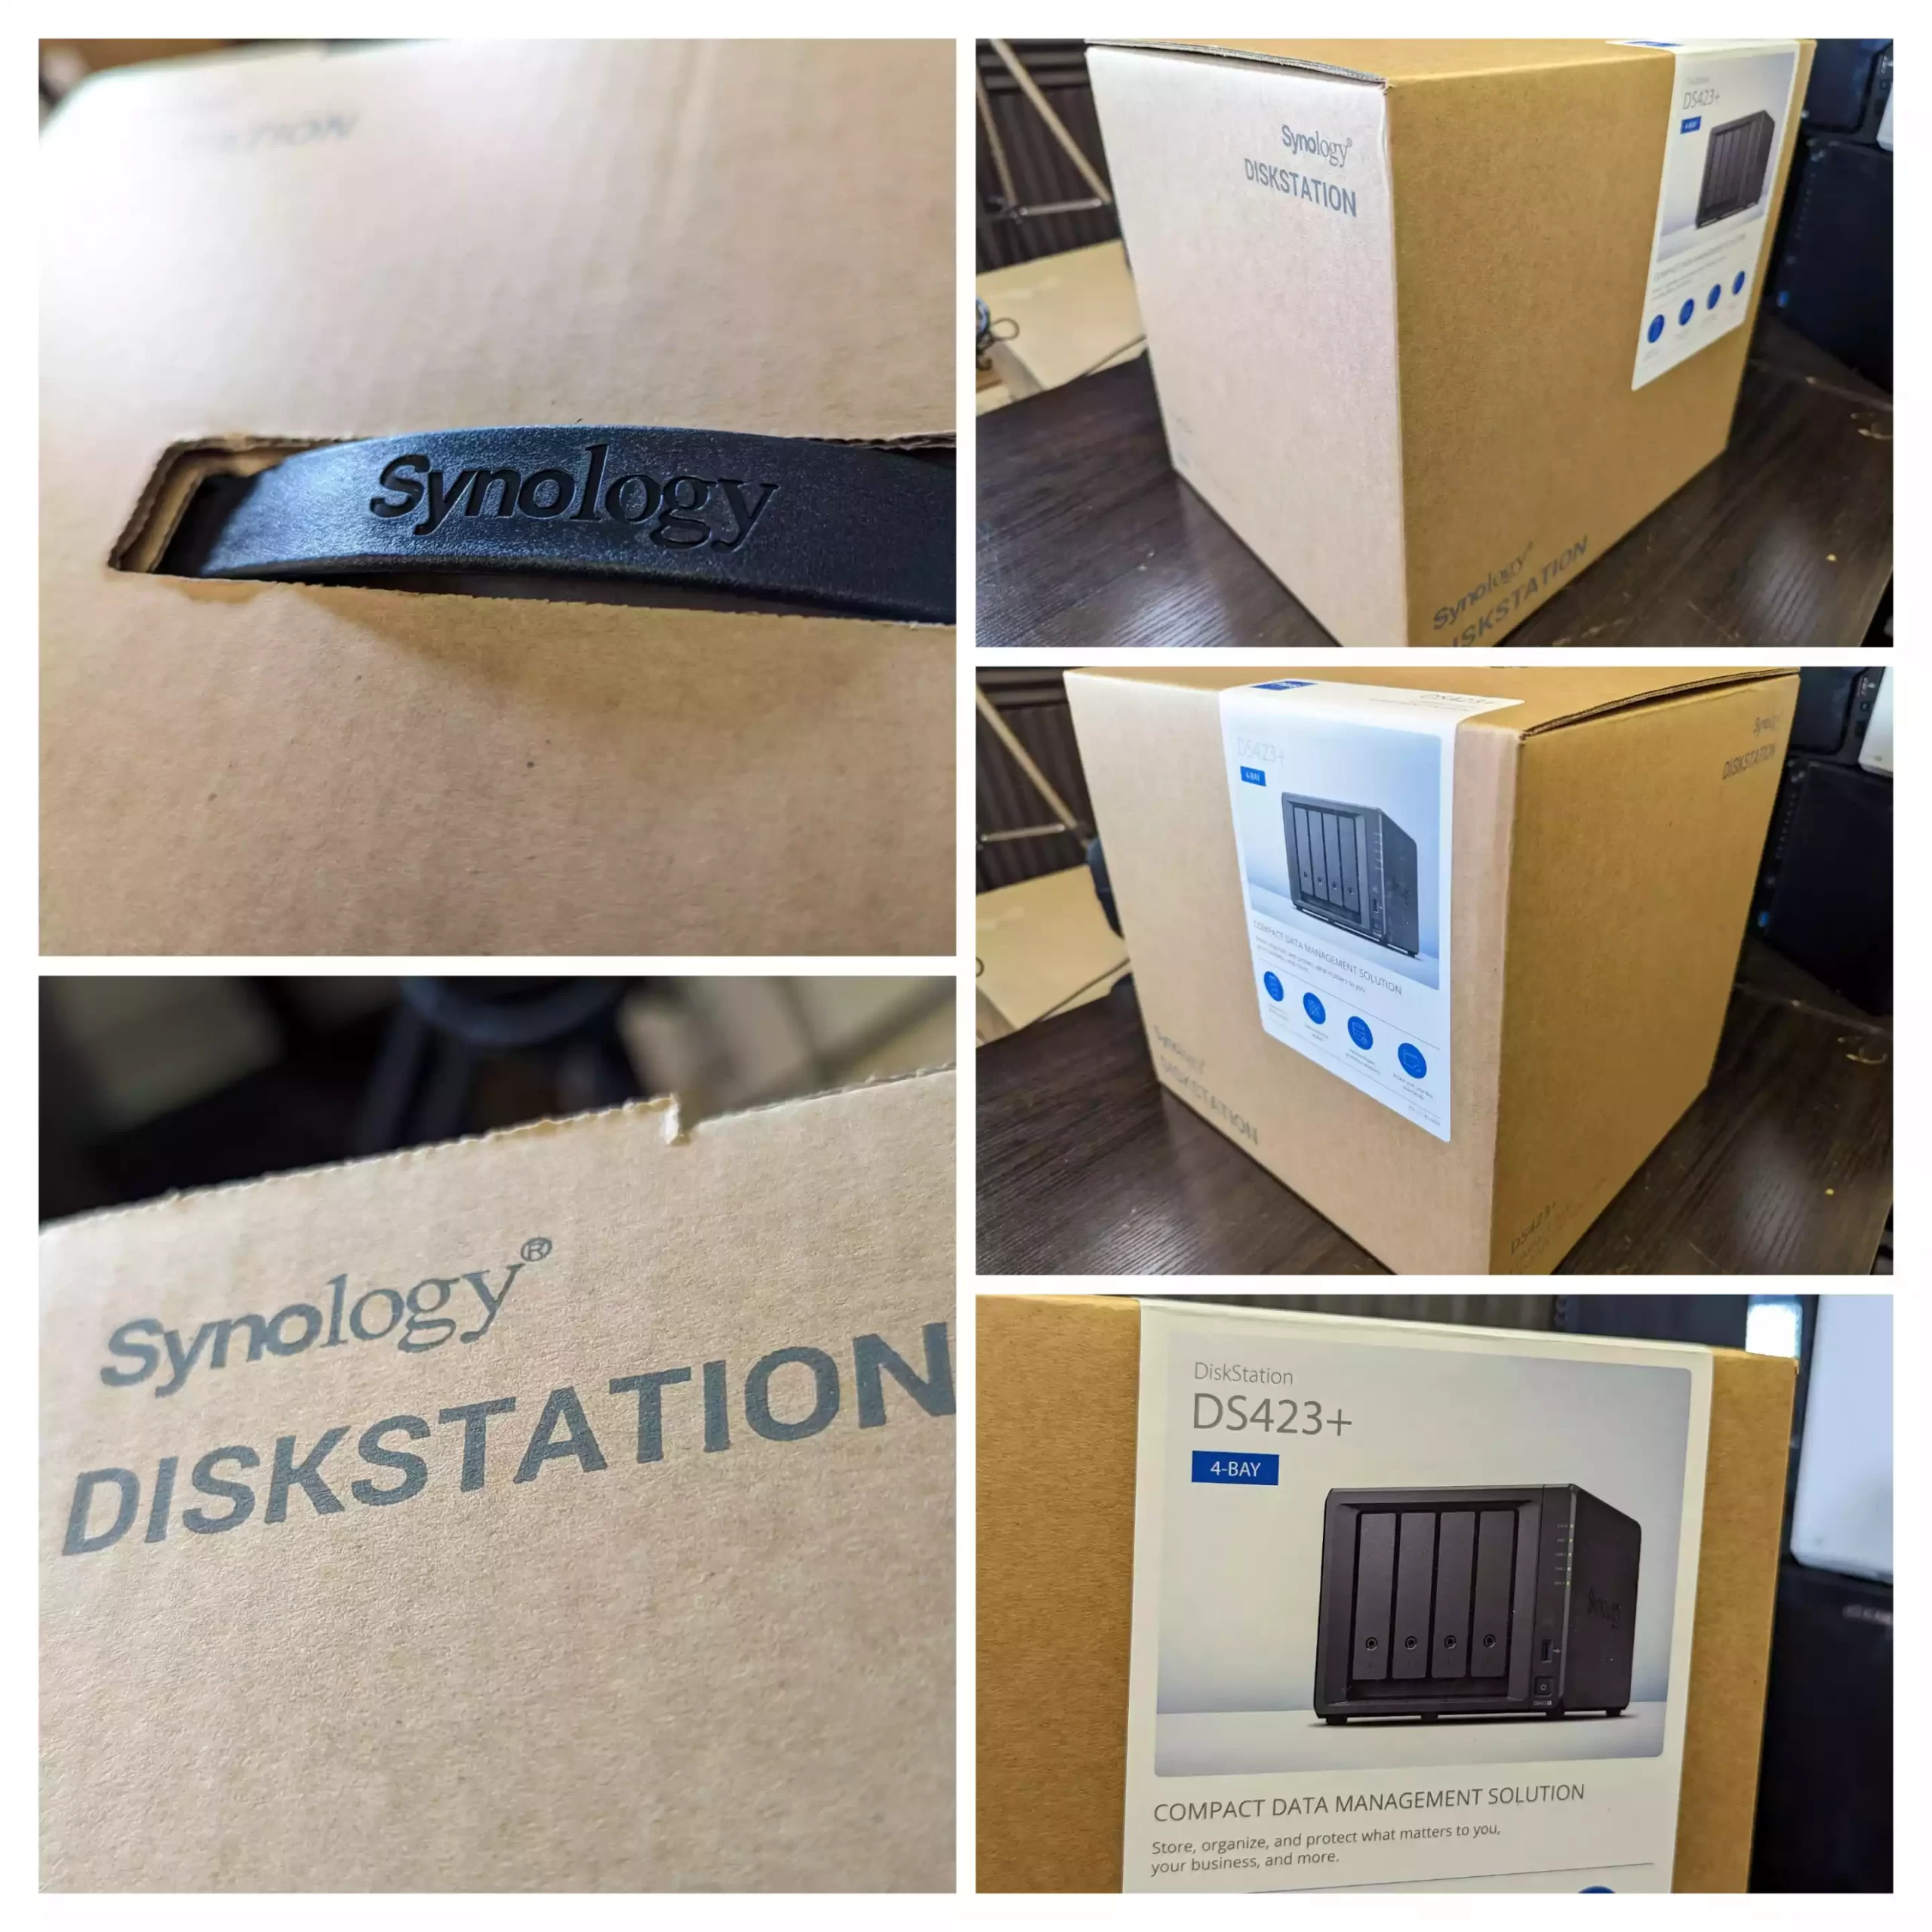 SYNOLOGY DISKSTATION DS423 4 BAY NAS 2GB DDR4 - SYN-DS423